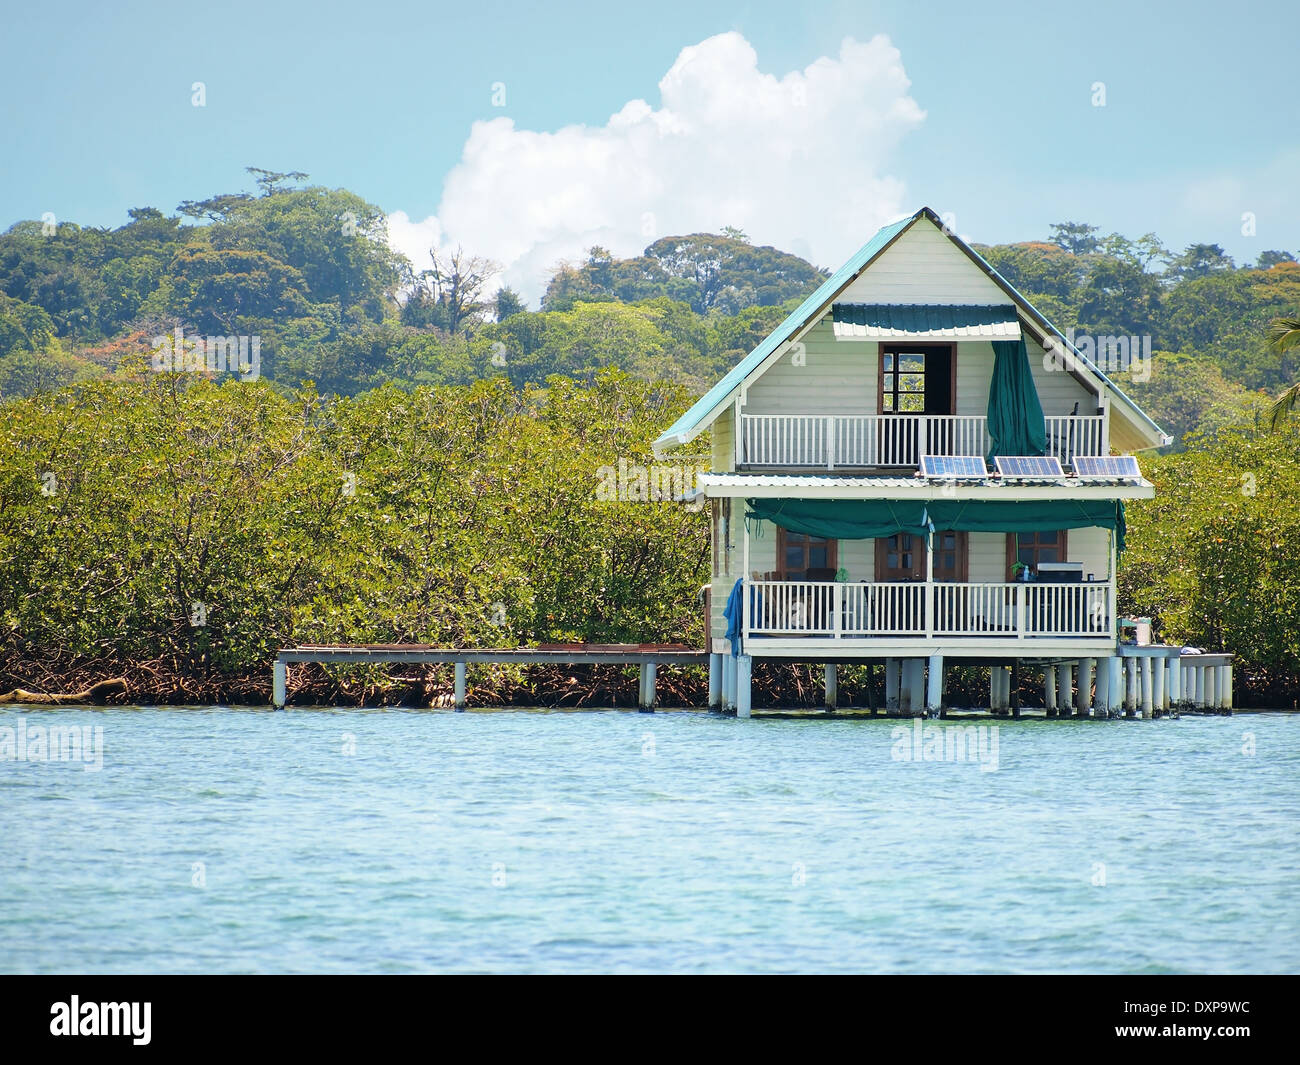 House on stilts over water with solar panels and dense tropical vegetation in background, Bocas del Toro, Caribbean sea, Panama Stock Photo